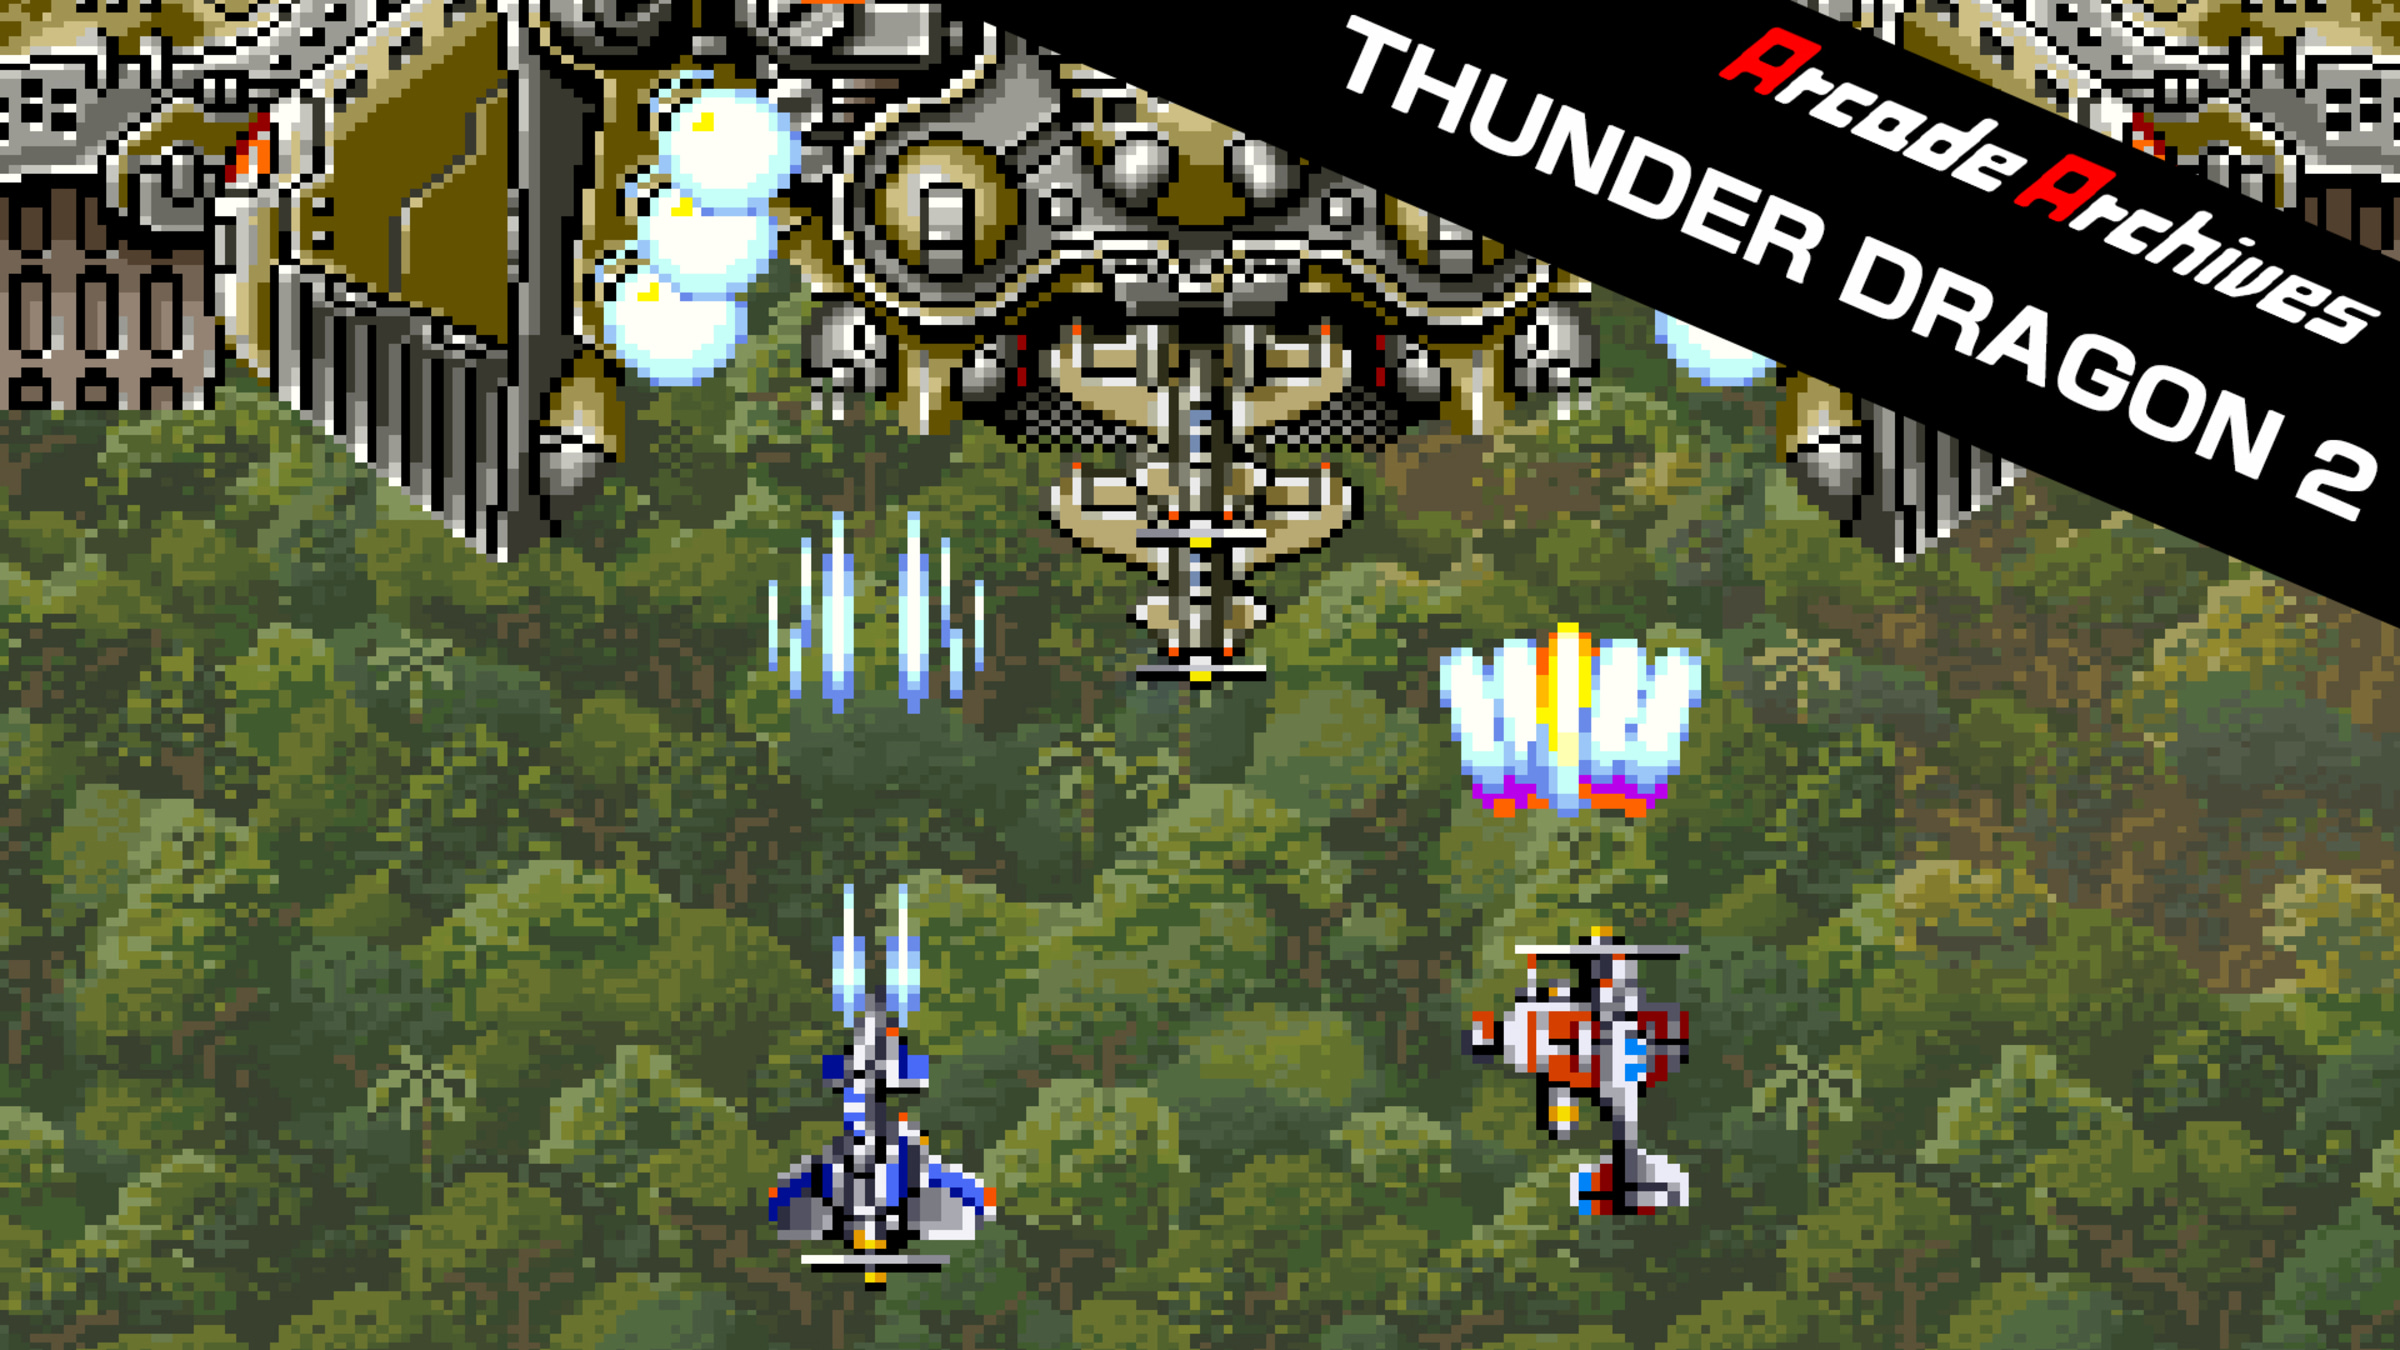 Arcade Archives THUNDER DRAGON 2 for Nintendo Switch